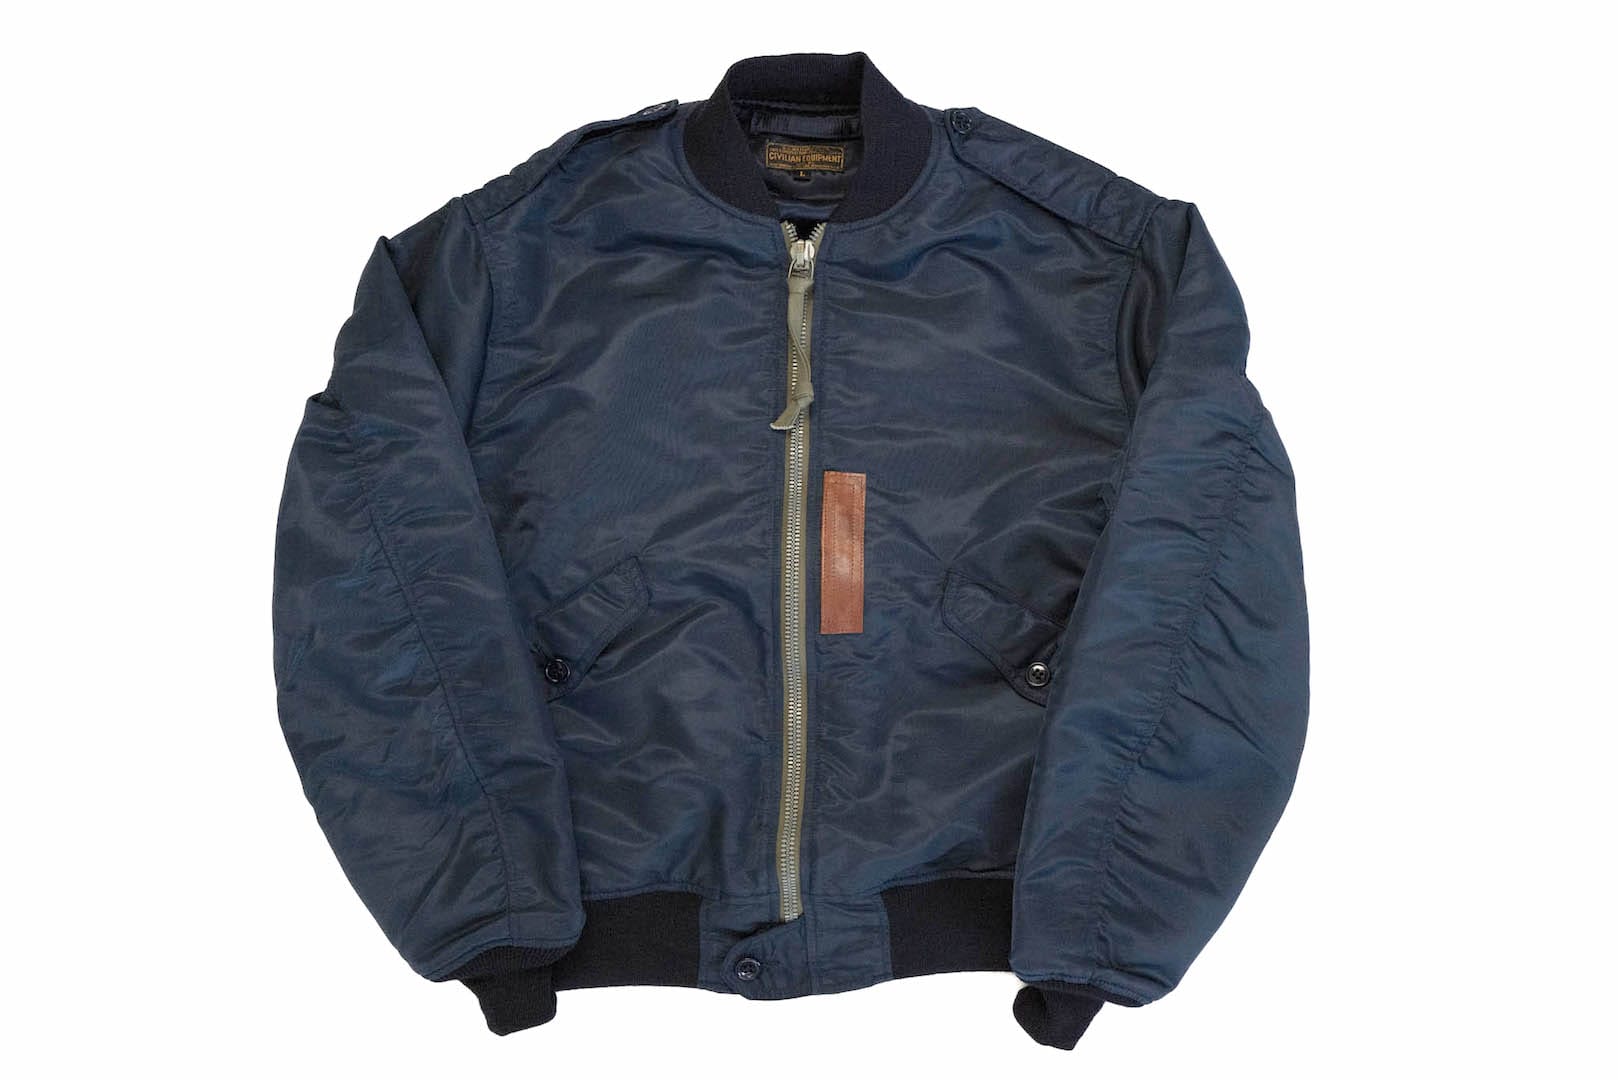 U.S Naval G-1 Bomber Jackets Collection - Buy Forces Jackets